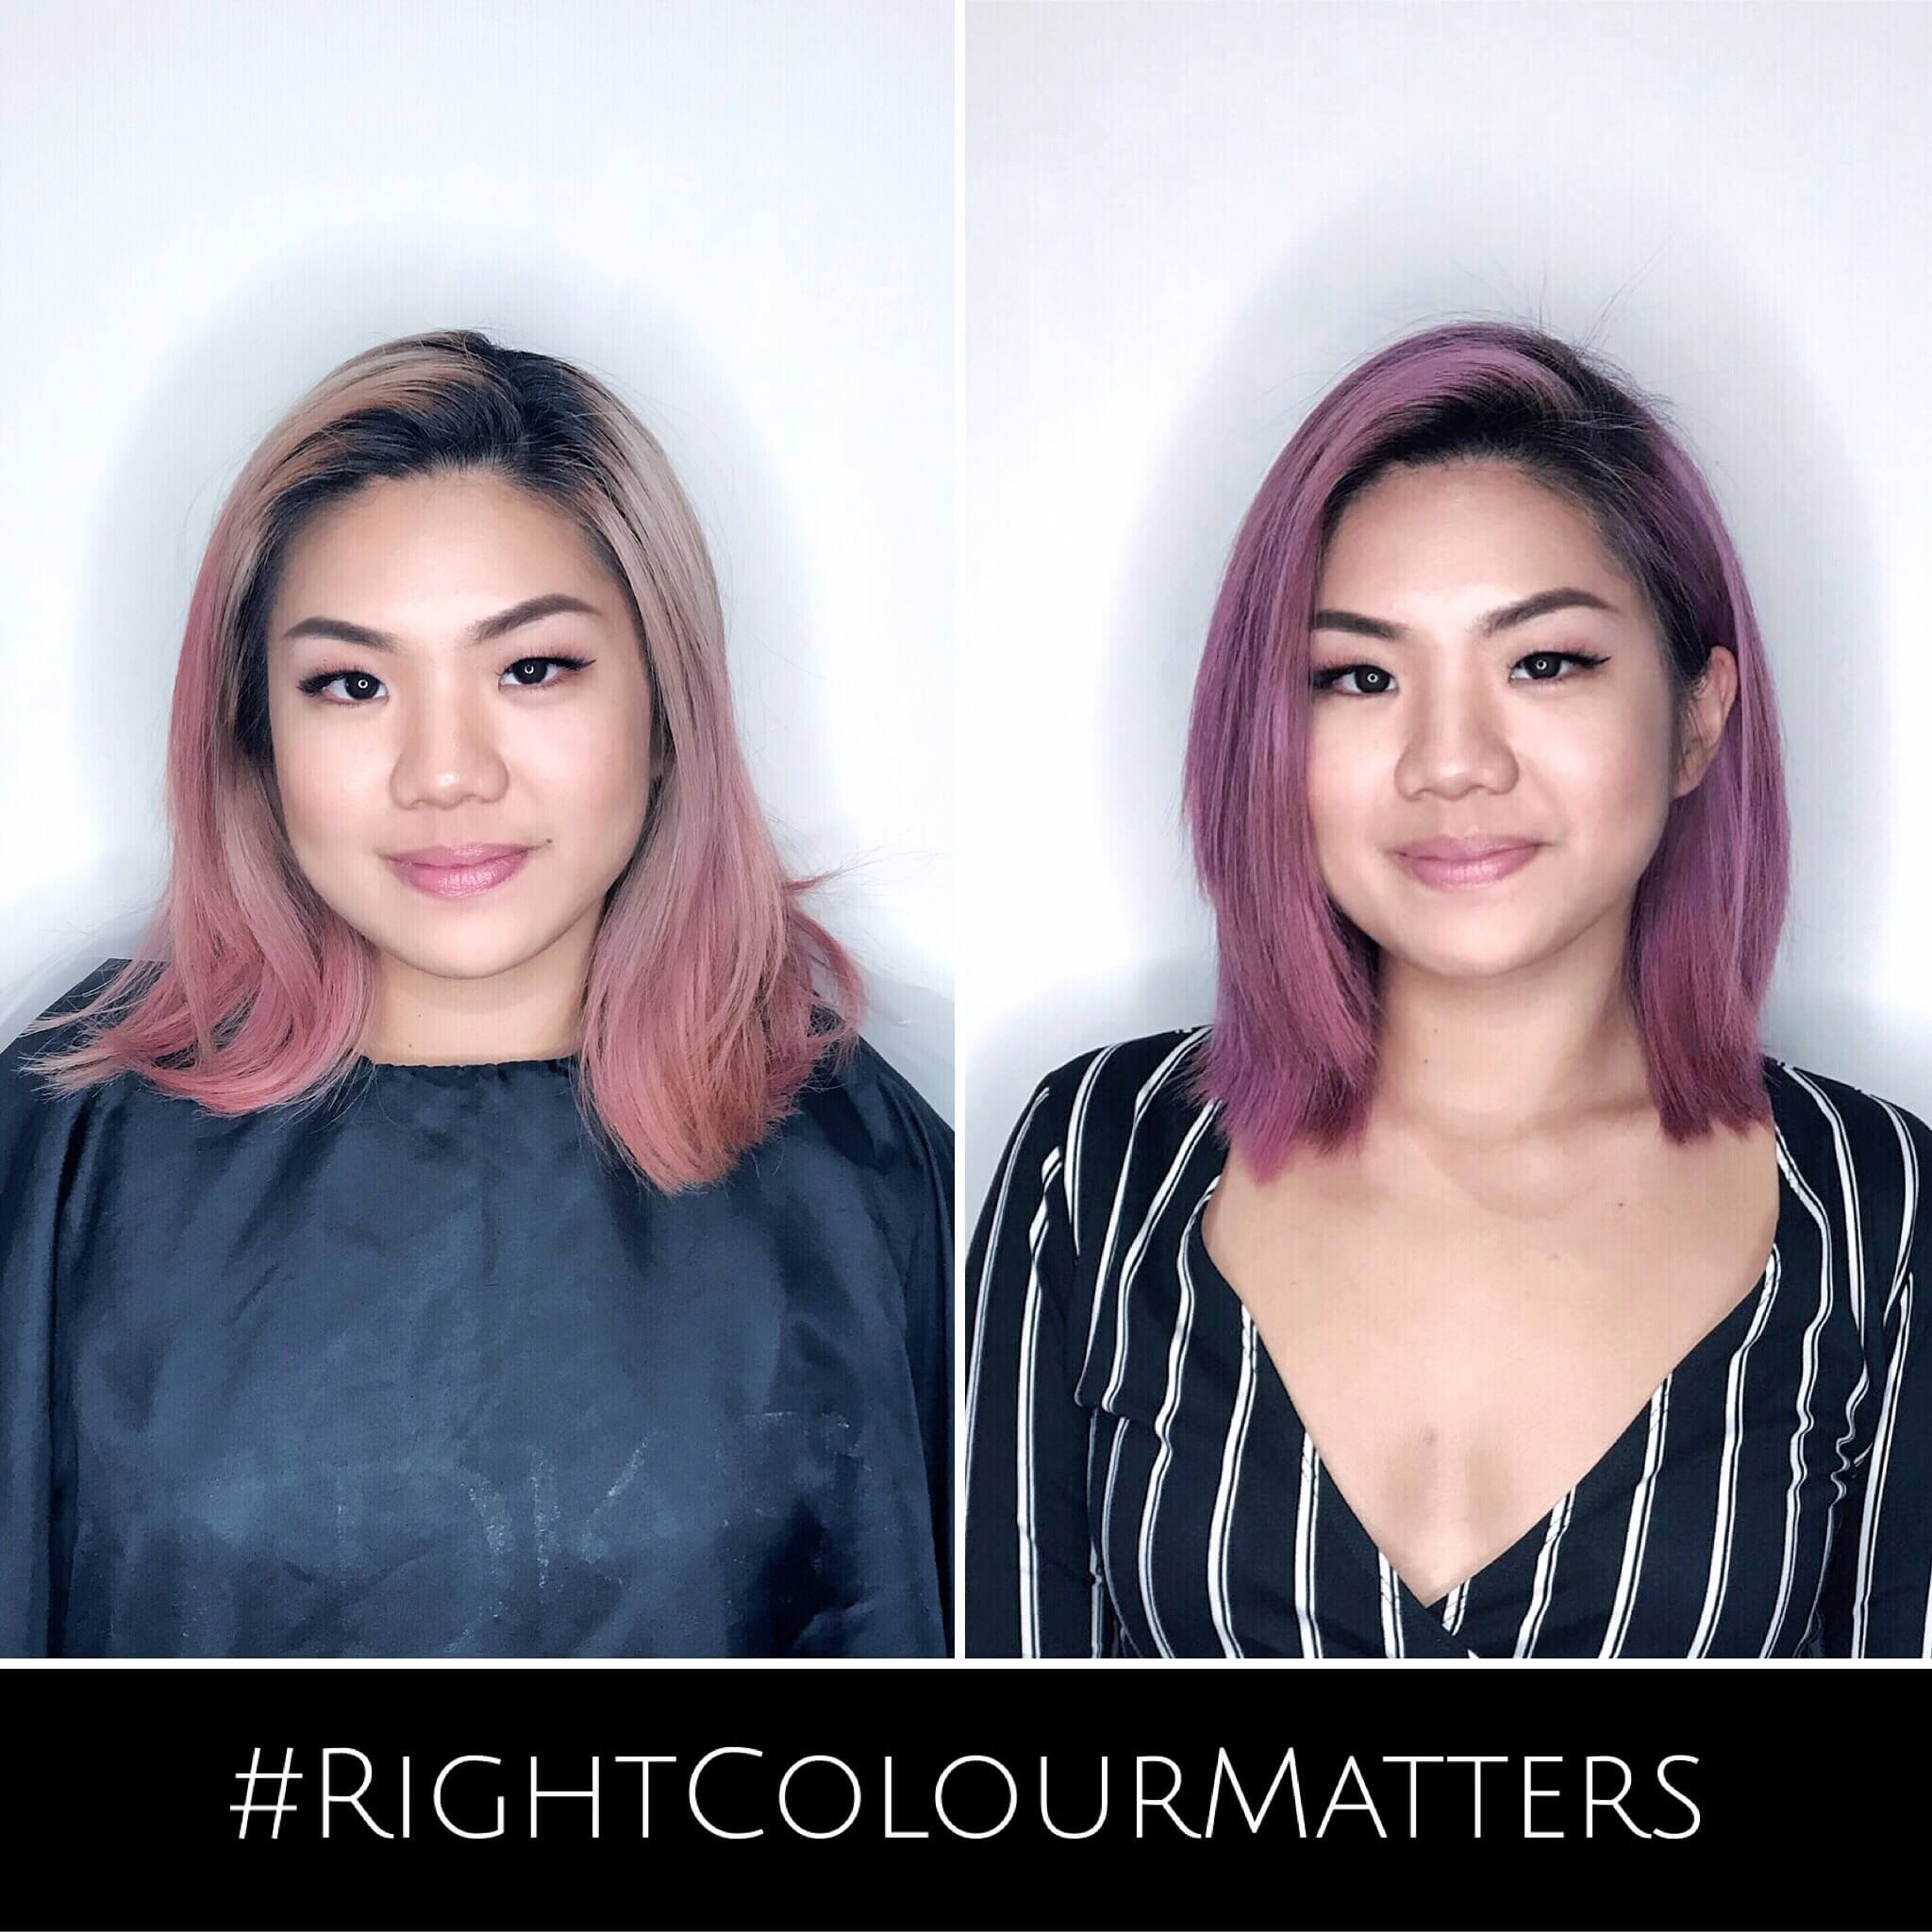 Dusty Lavender Hair designed by Associate Director of Chez Vous Salon, Shawn Chia using #RightColourMatters diagnosis / Model: Annabel